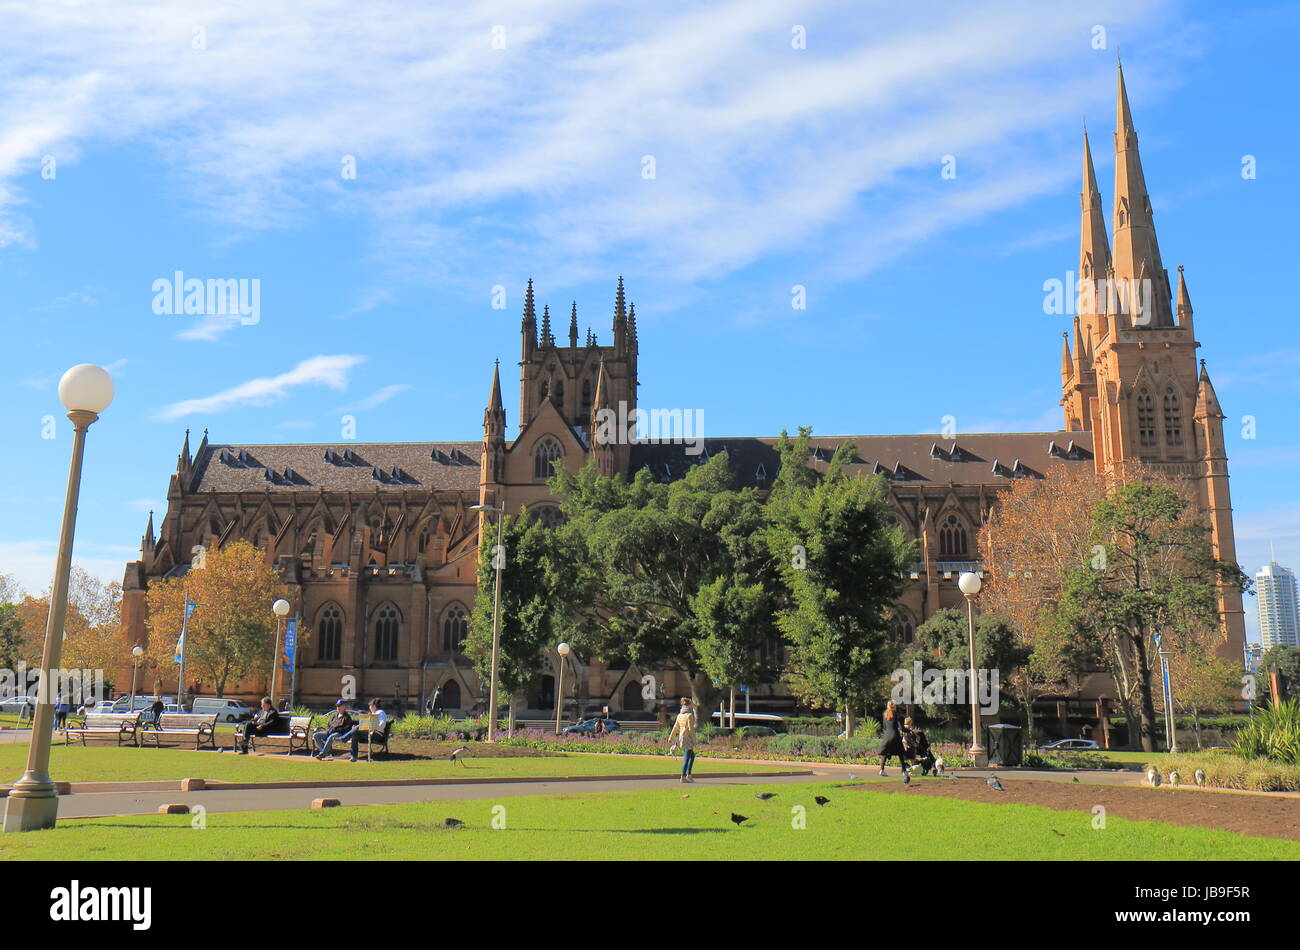 People visit Historical architecture St Marys cathedral in Sydney Australia. Stock Photo